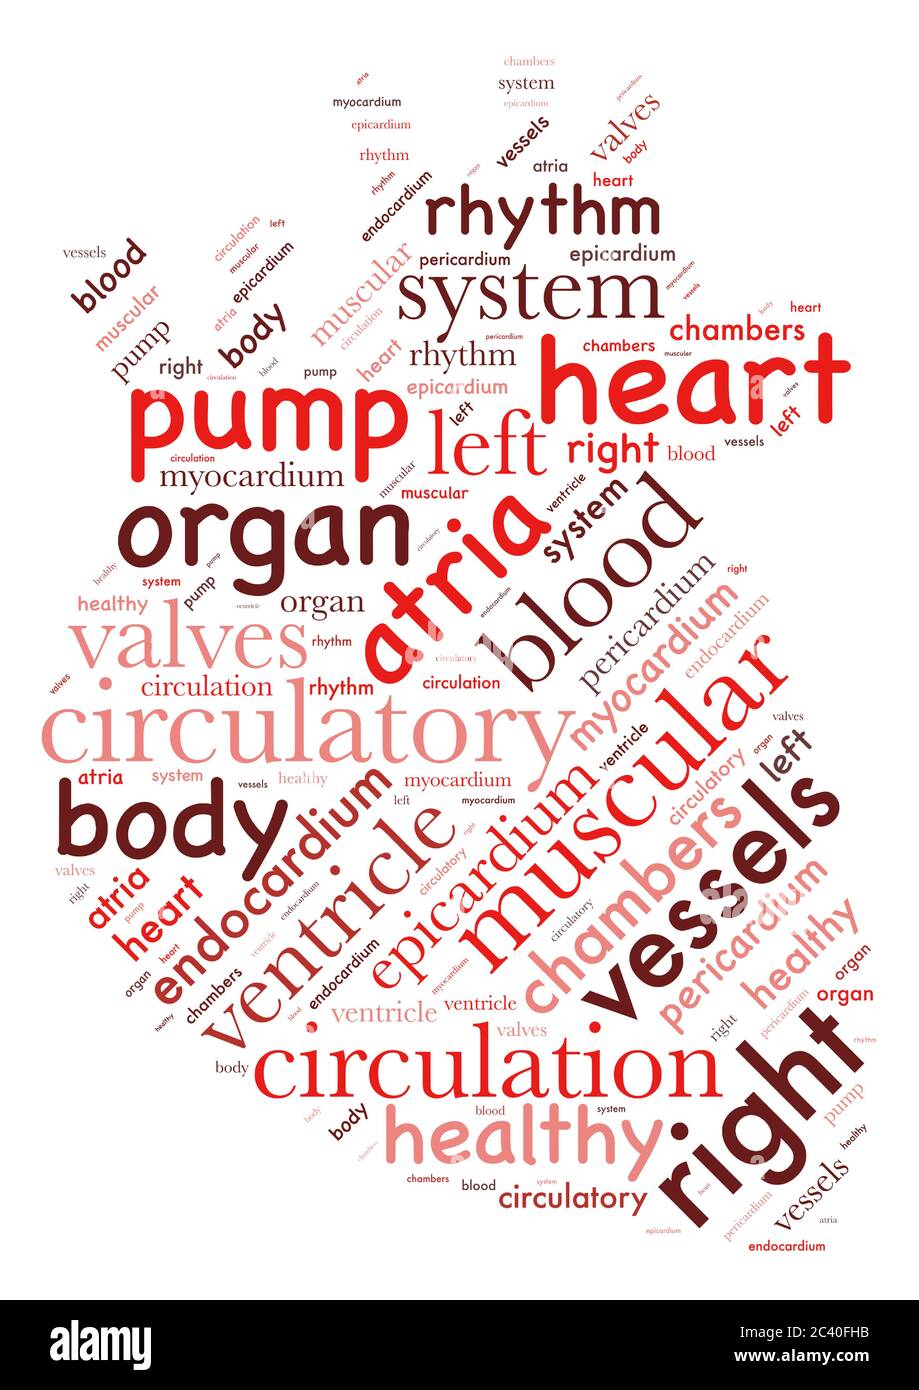 Word cloud representing the parts of the human heart Stock Vector